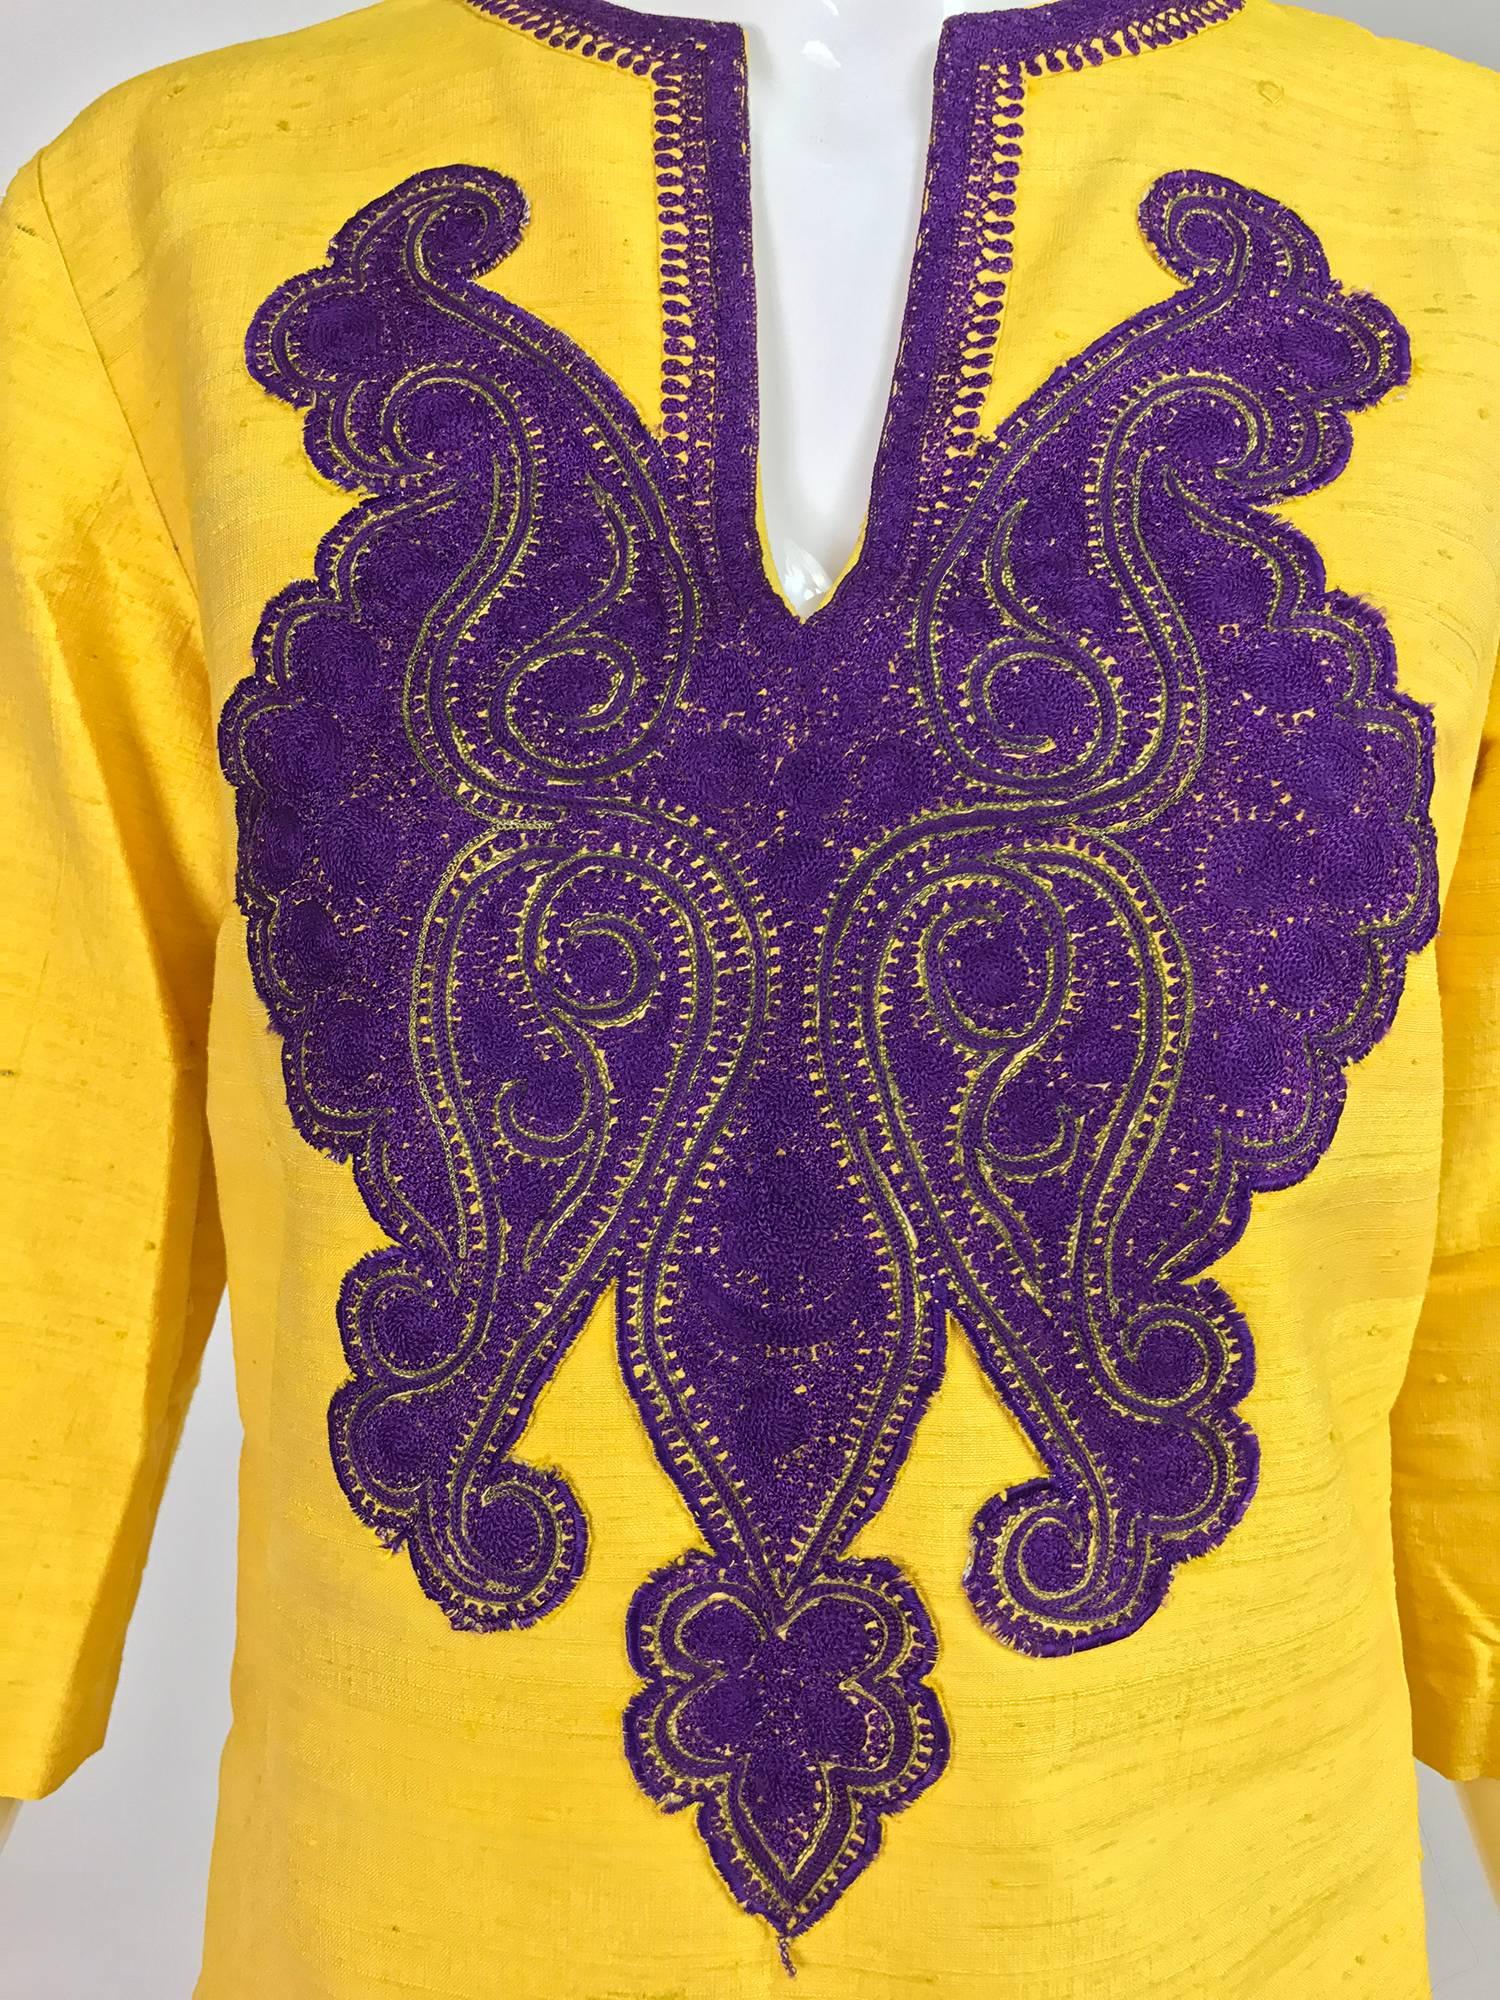 Saffron raw silk tunic or mini dress from the 1960s...V neck dress has flared elbow length sleeves, A line shape and darted bust...Unlined it closes at the back with a metal zipper...Vibrant slubbed silk has a banded neck opening trimmed with purple